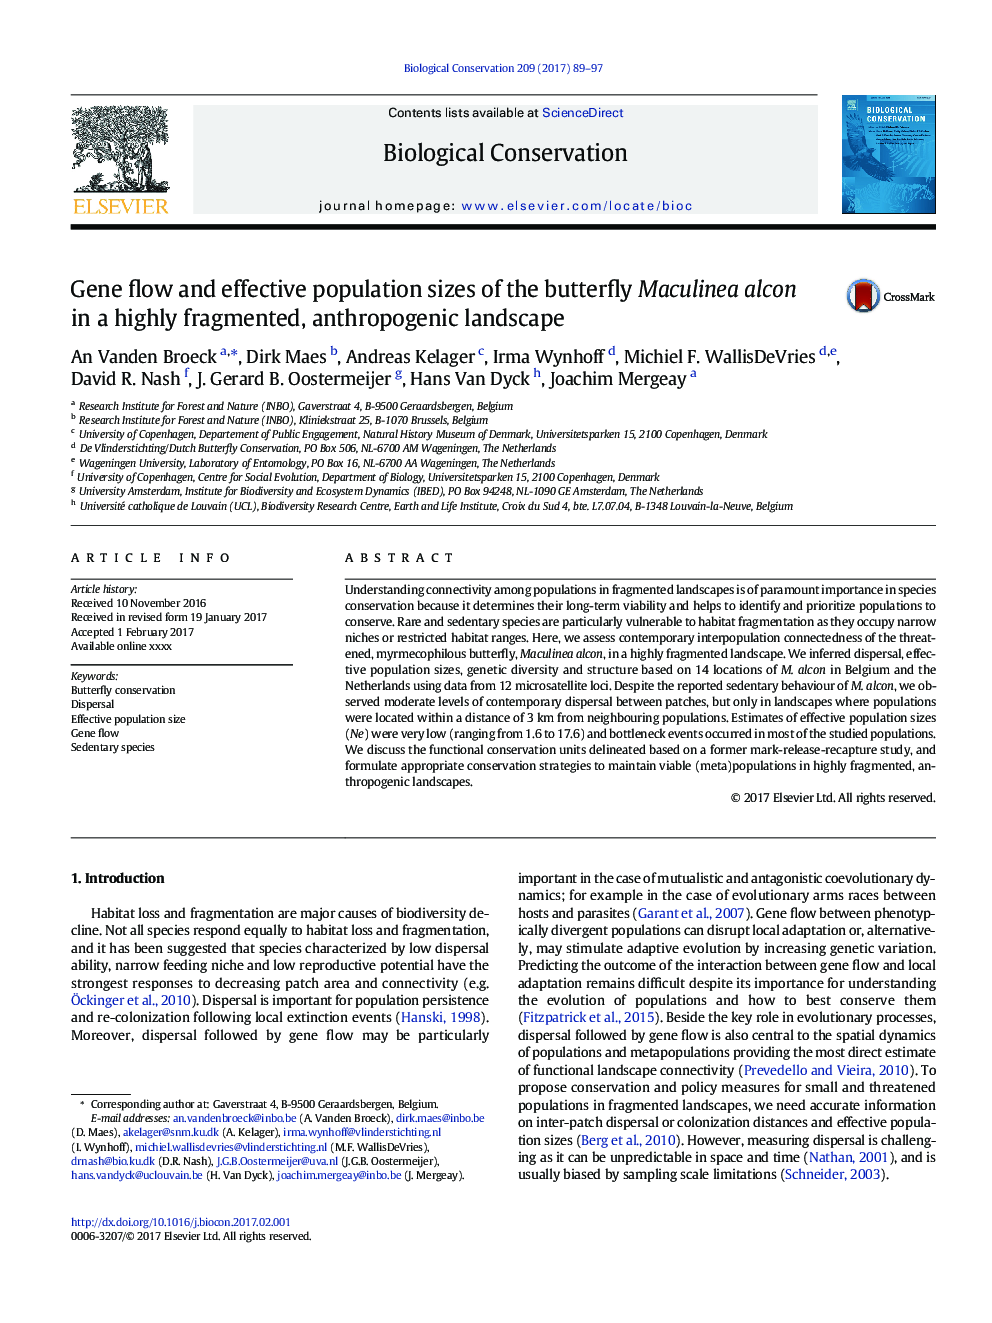 Gene flow and effective population sizes of the butterfly Maculinea alcon in a highly fragmented, anthropogenic landscape